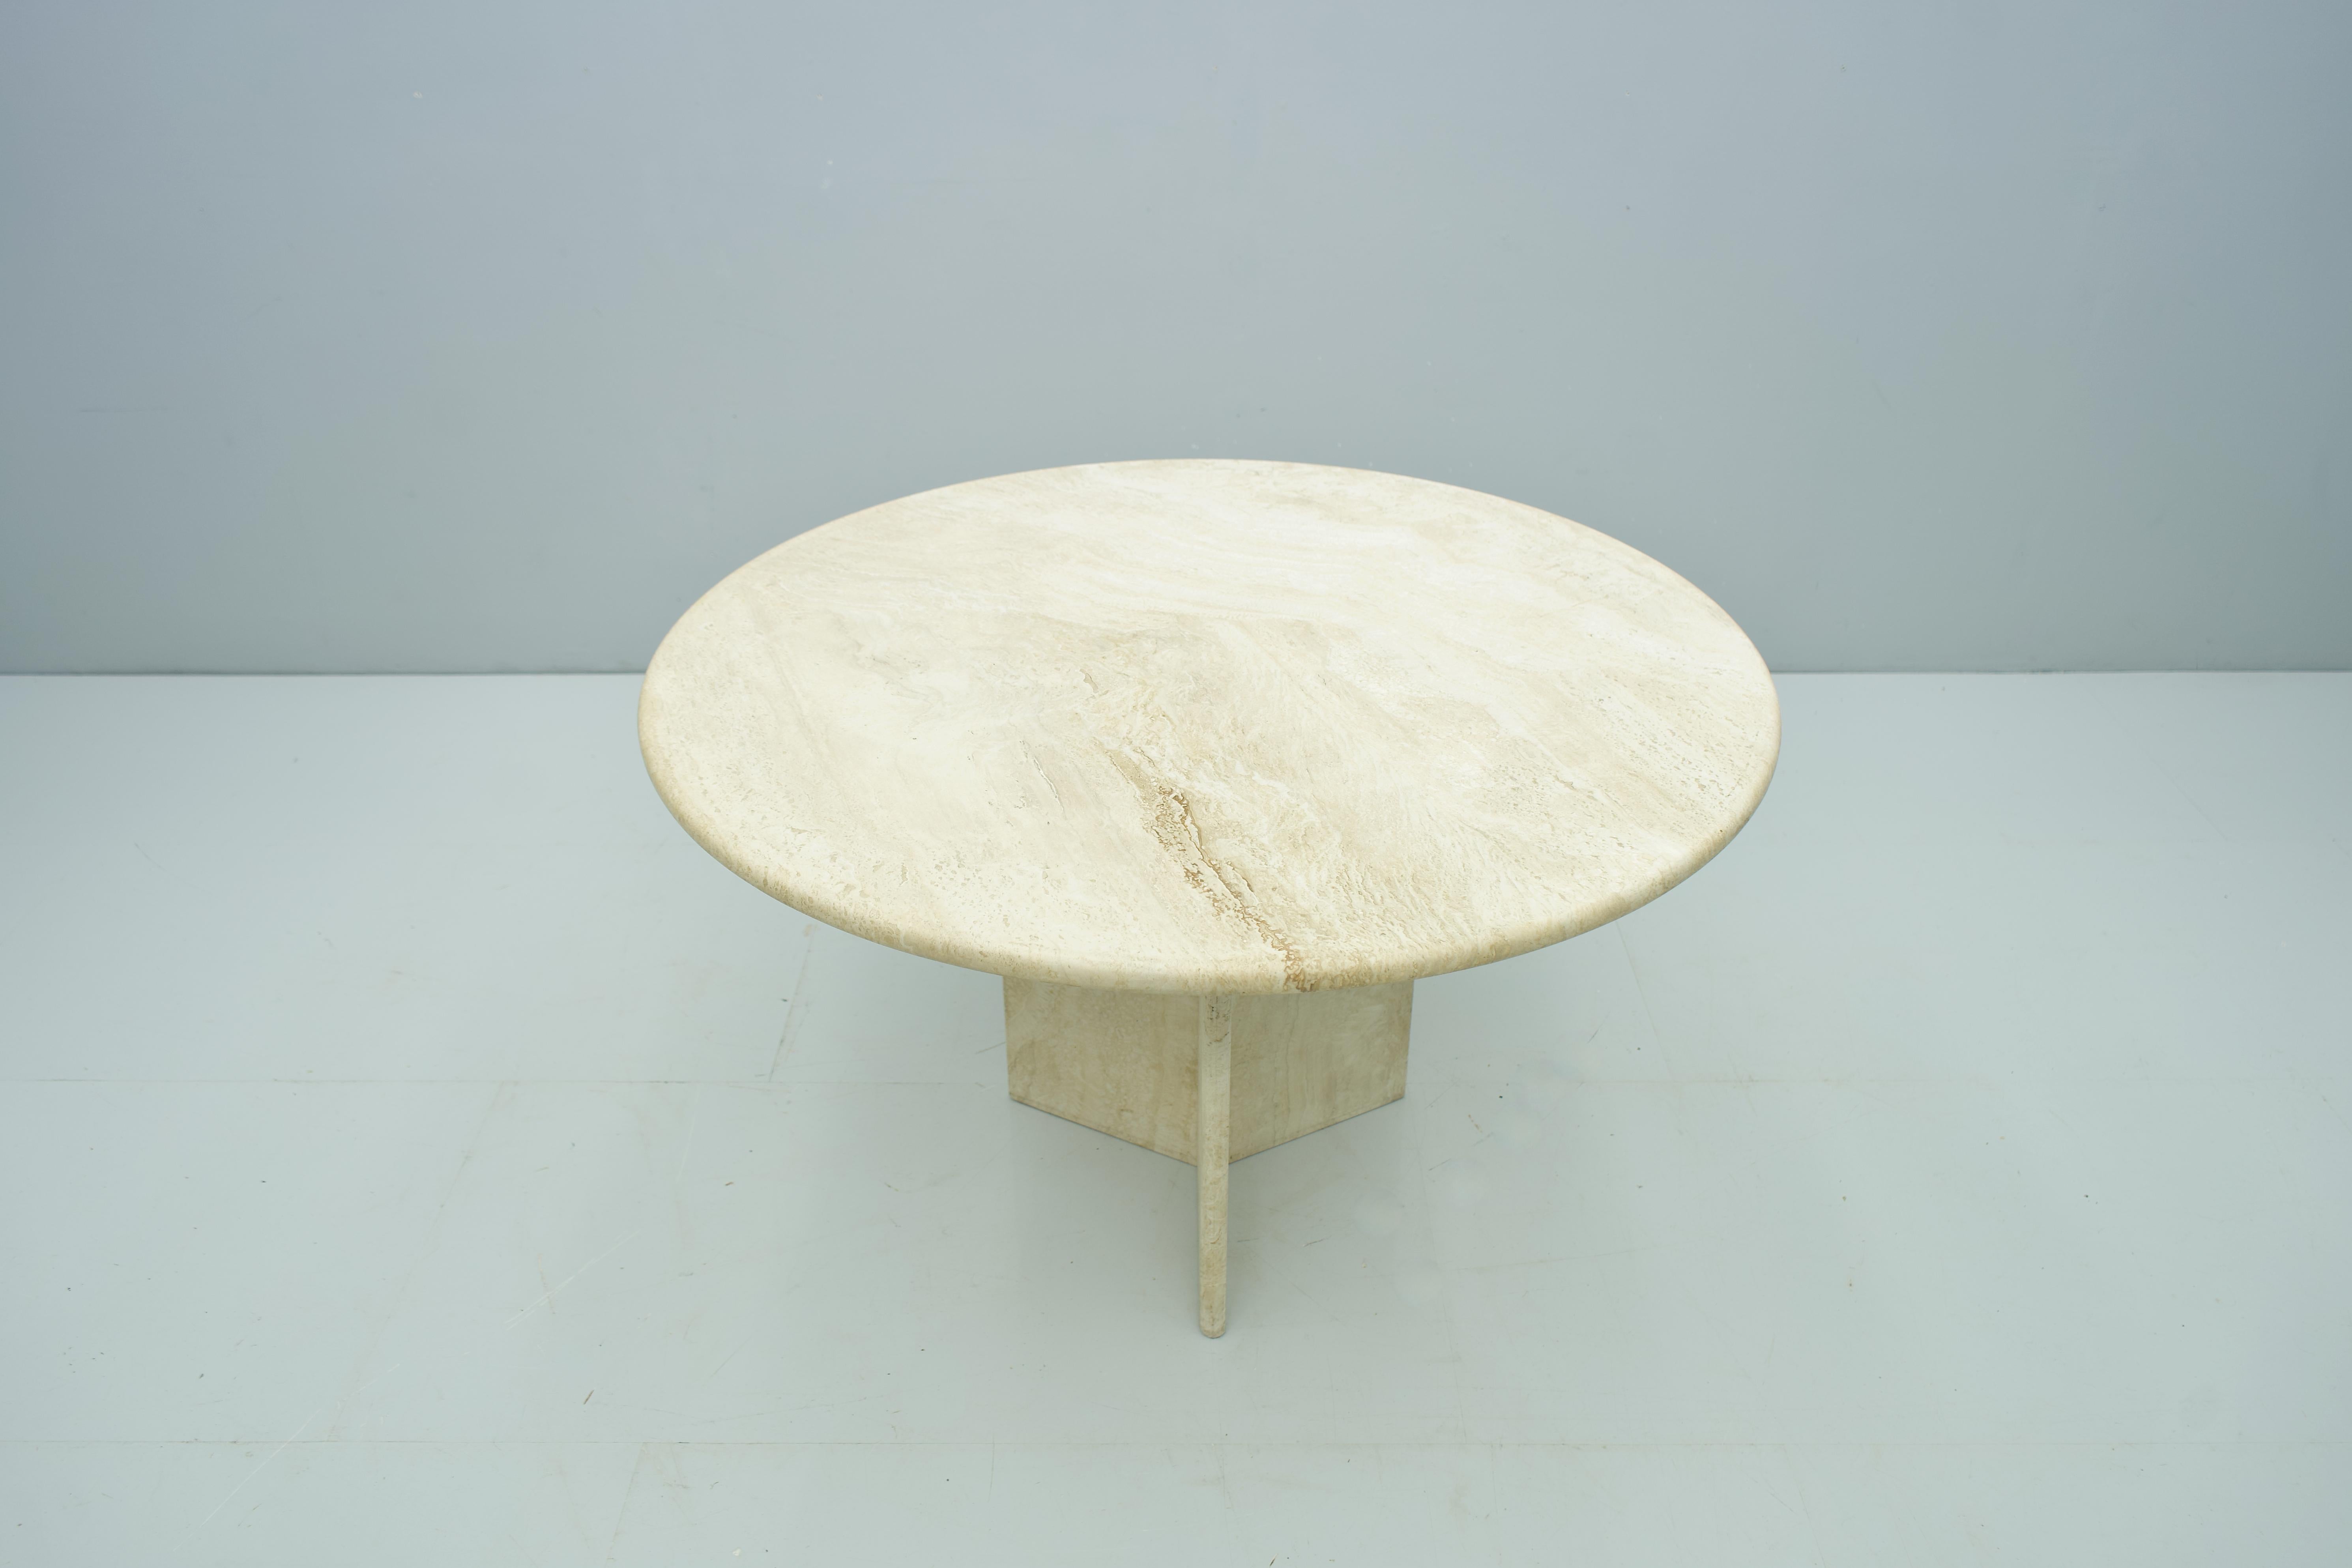 Round dining table in travertine, Italy late 1970s with a beautiful grain.
Measures: Diameter 120 cm, height 73 cm.
Very good condition.